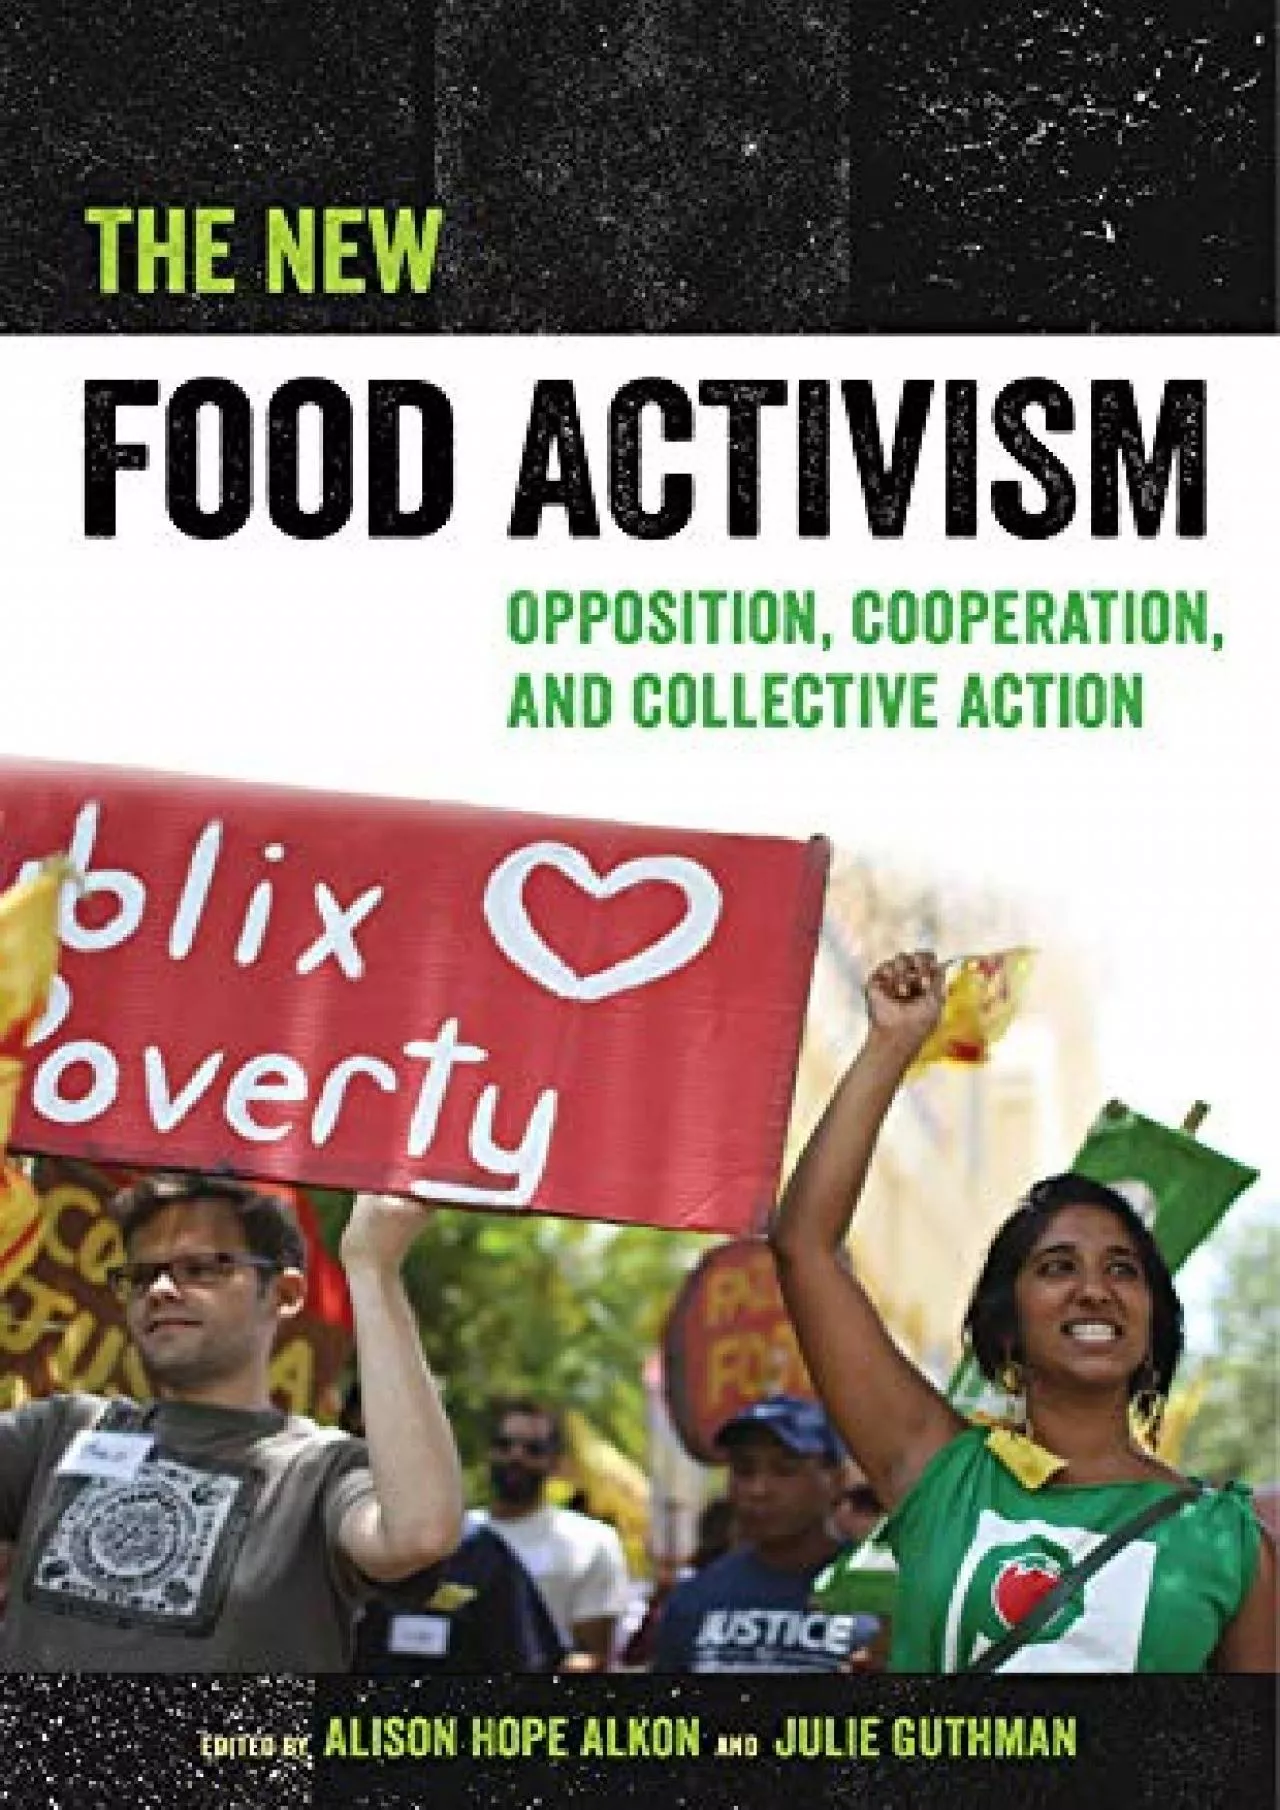 [BOOK]-The New Food Activism: Opposition, Cooperation, and Collective Action